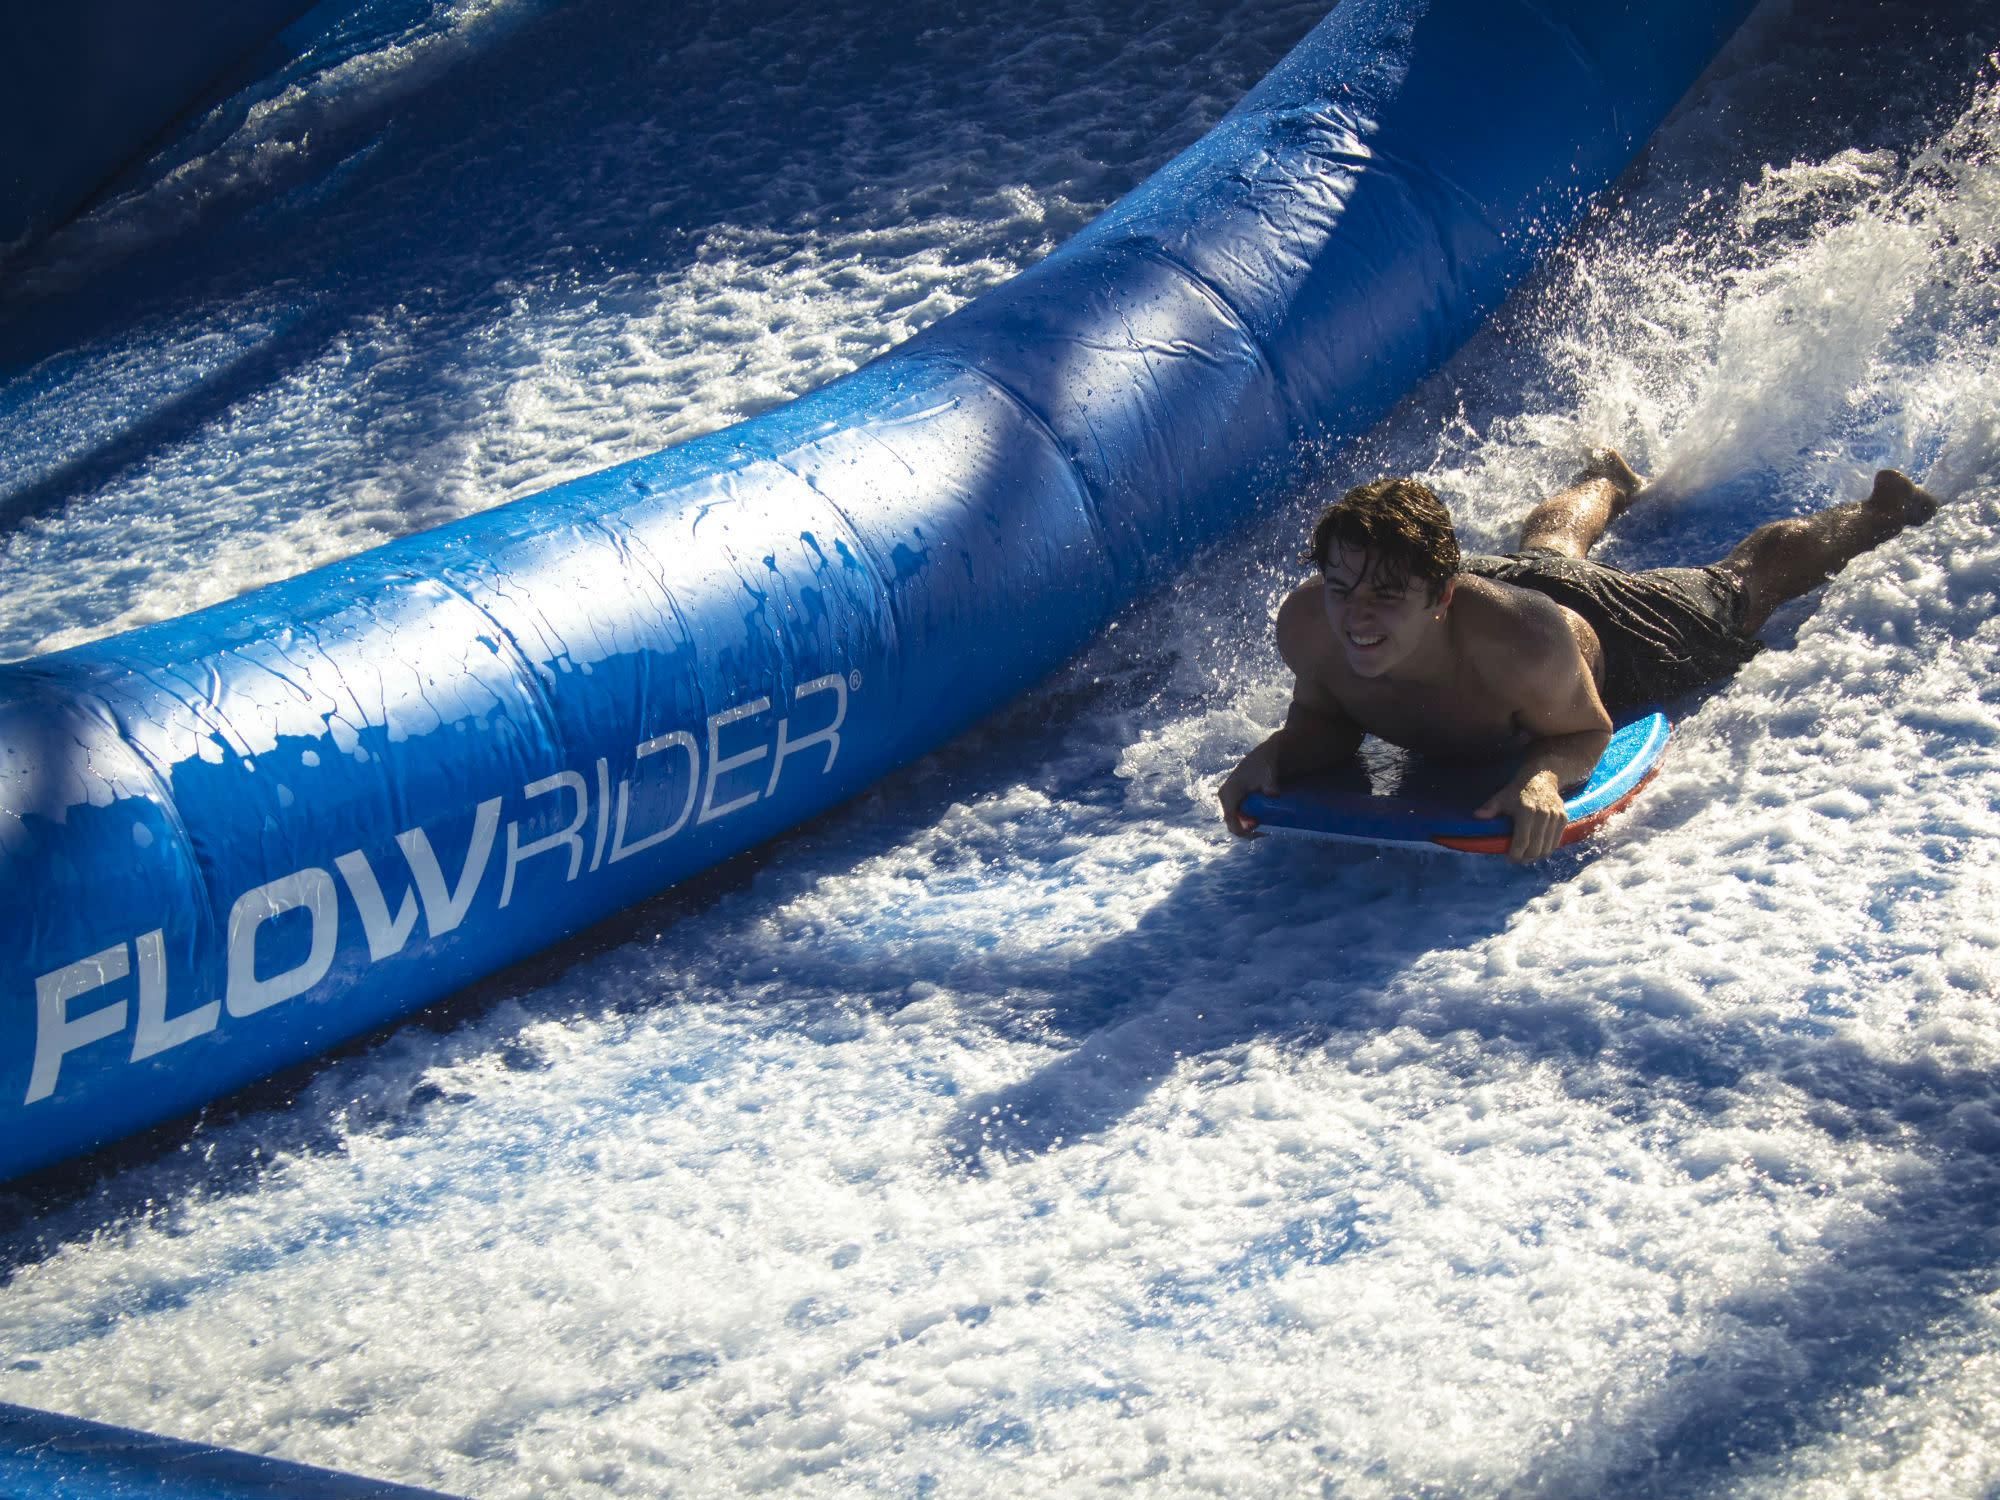 Flow Rider at Epic Waters